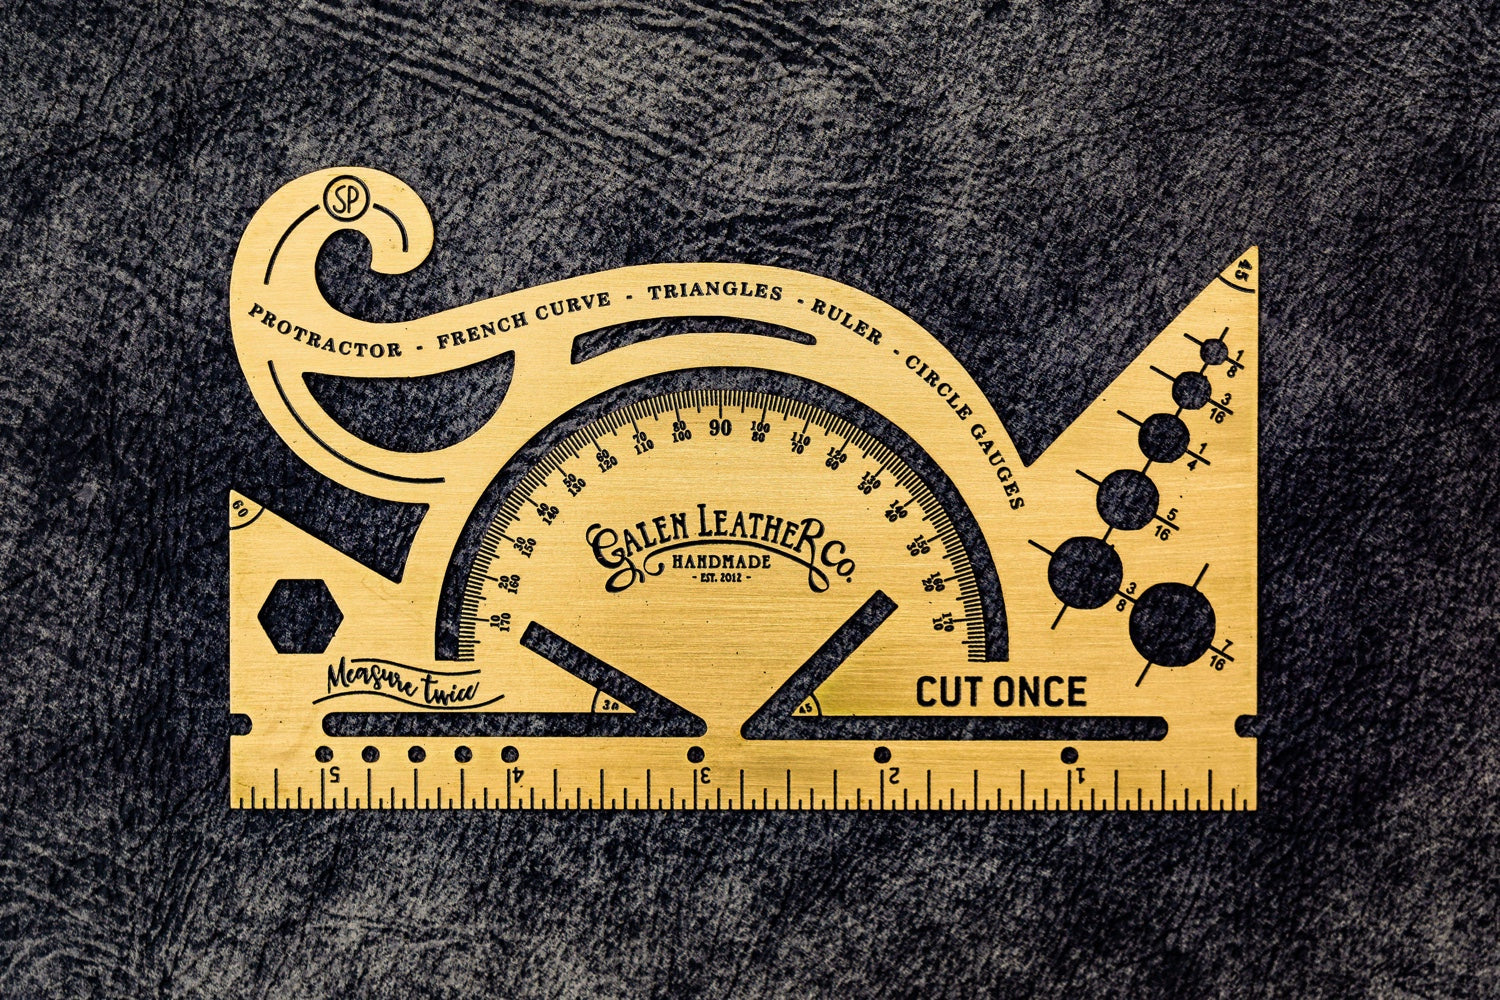 Galen Leather Brass Protractor and Combined Tool includes a protractor, french curve, triangles, and circle.